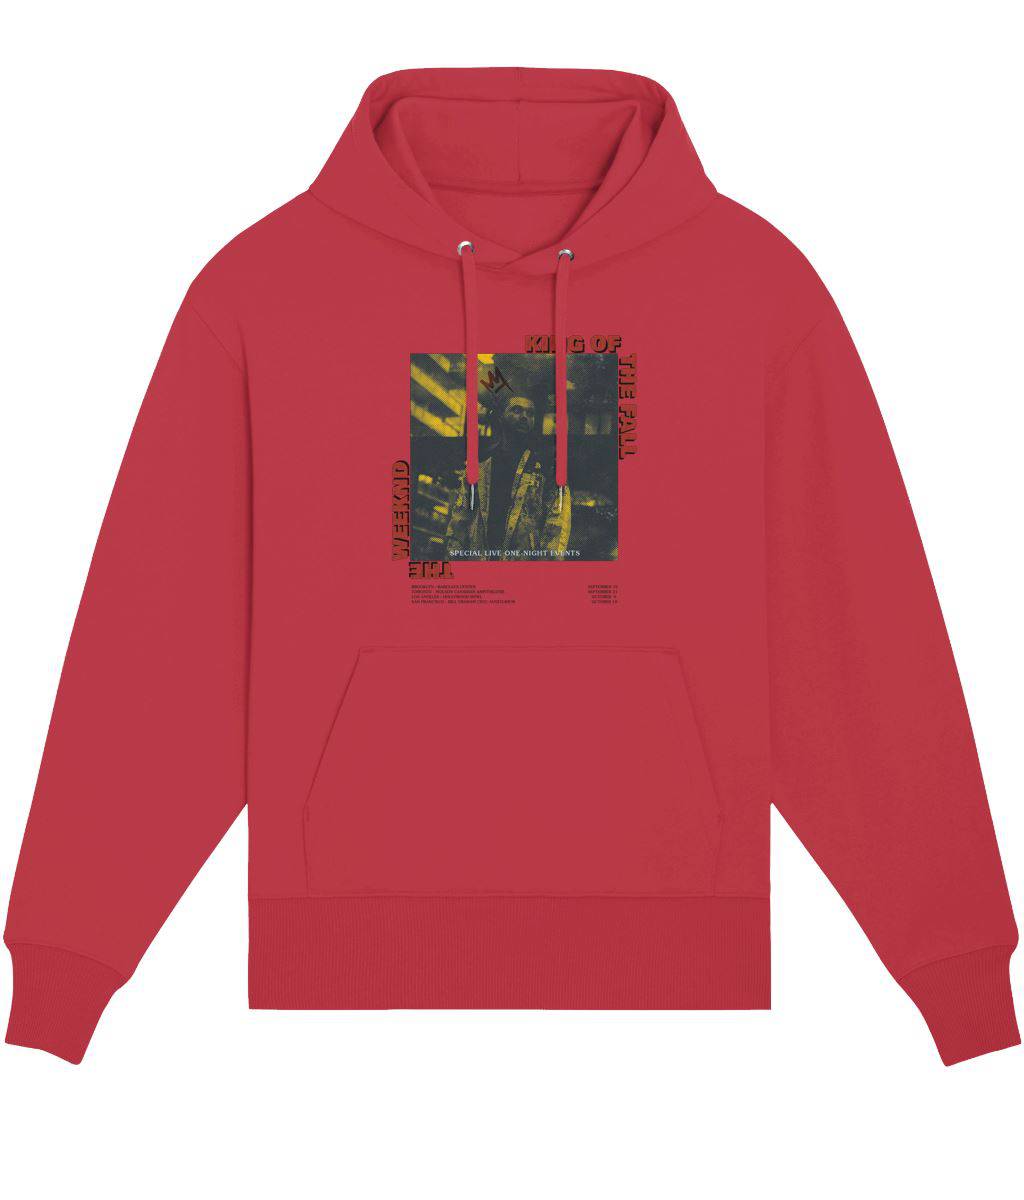 King Of The Fall Hoody Hoody Greazy Tees XS Red Oversized